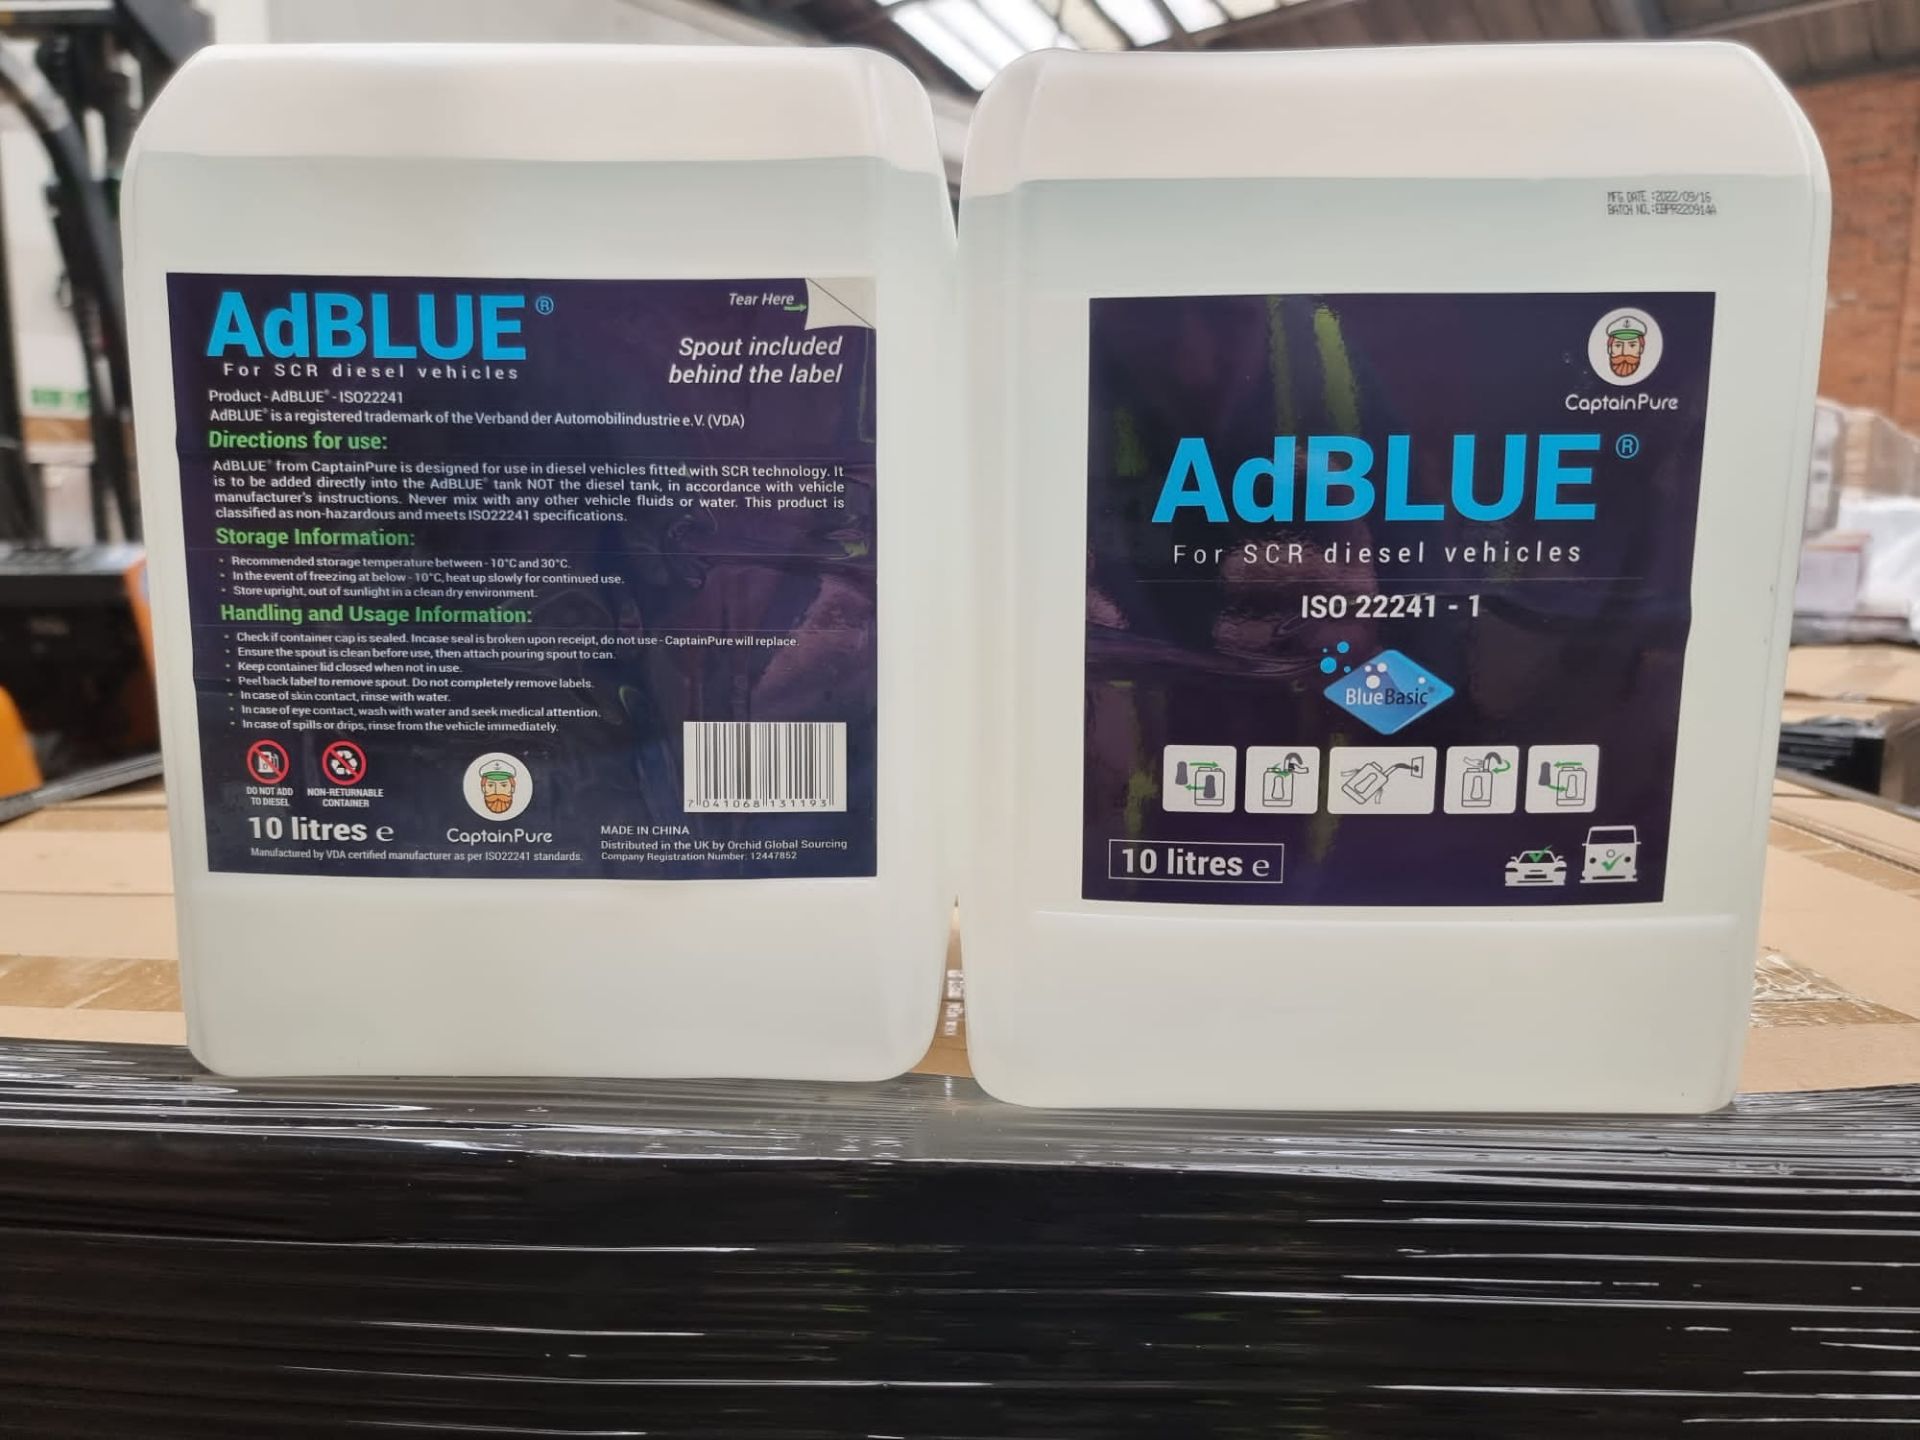 12 x NEW SEALED 10L TUBS OF ADBLUE FOR DIESEL VEHICLES. INCLUDES NOZZLE. AdBlue is the registered